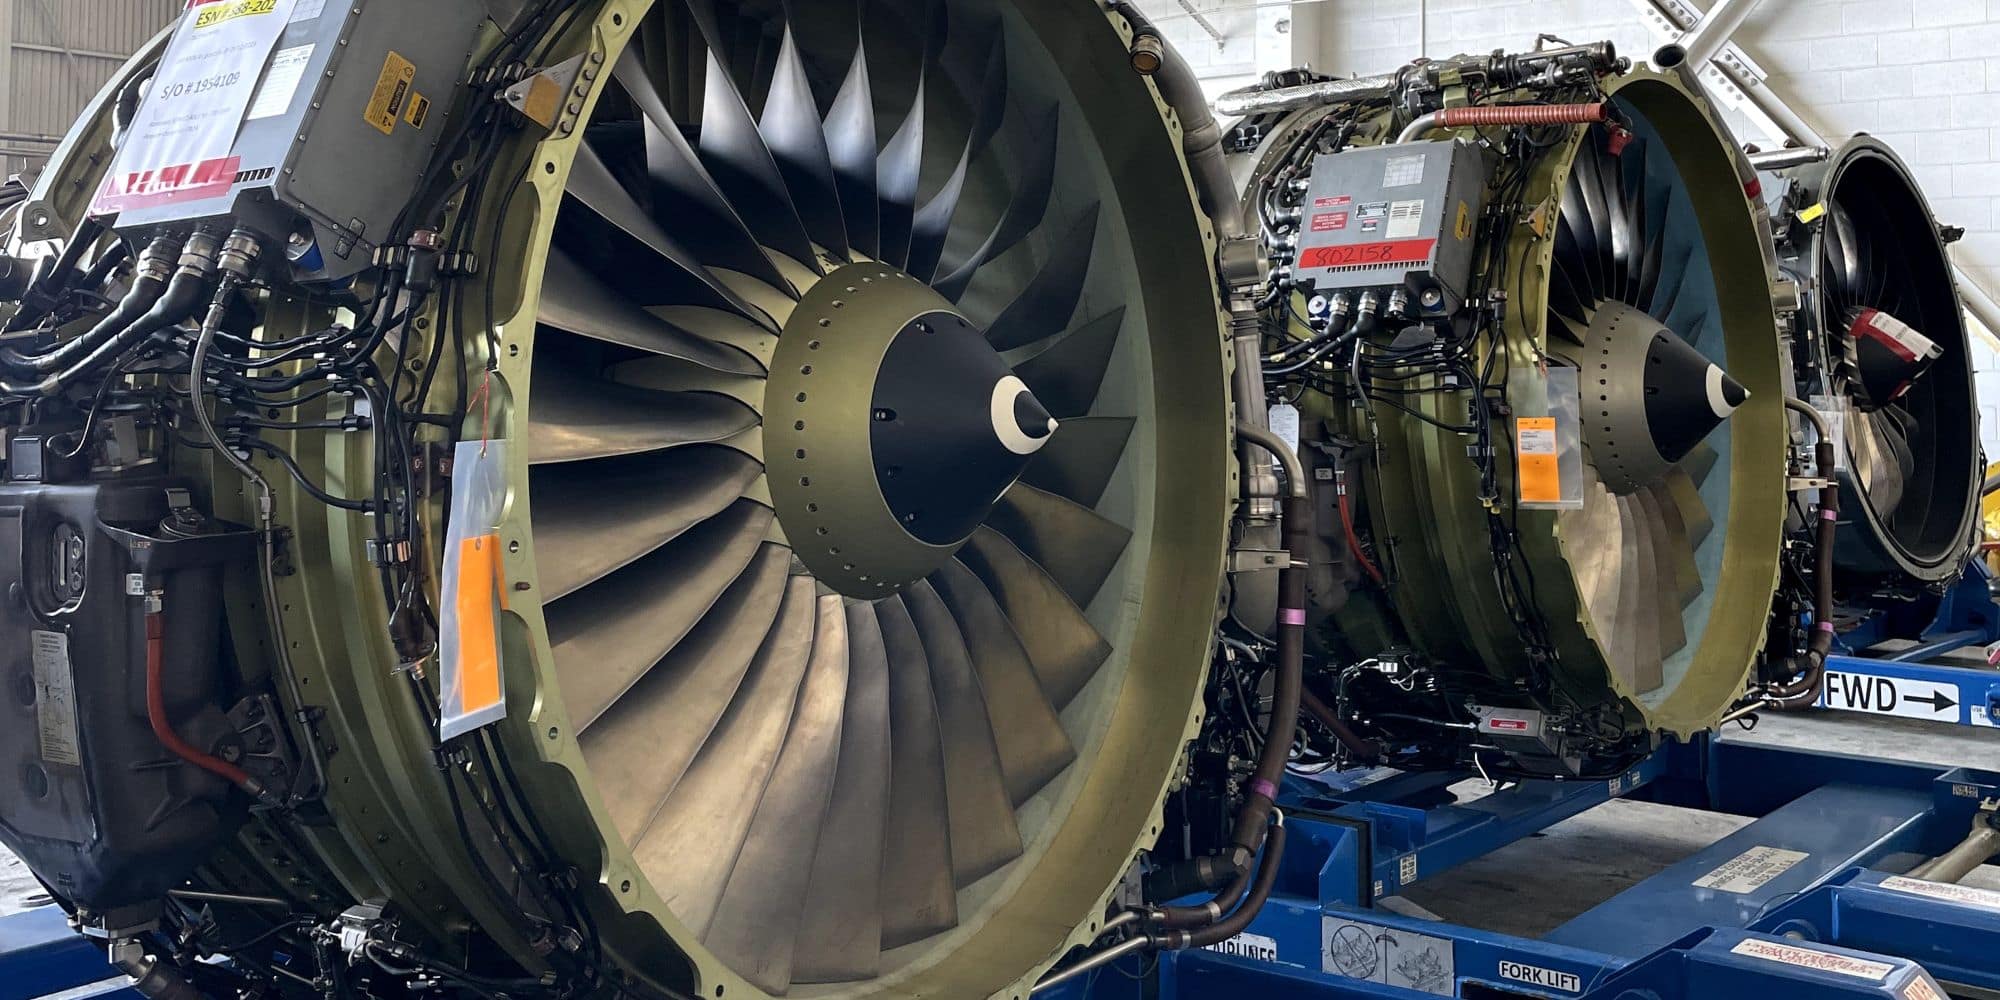 During a tour of the Alaska Airlines hangar, Megan Gill took this shot of Boeing 737 engines undergoing maintenance work. (Photo: Megan Gill)